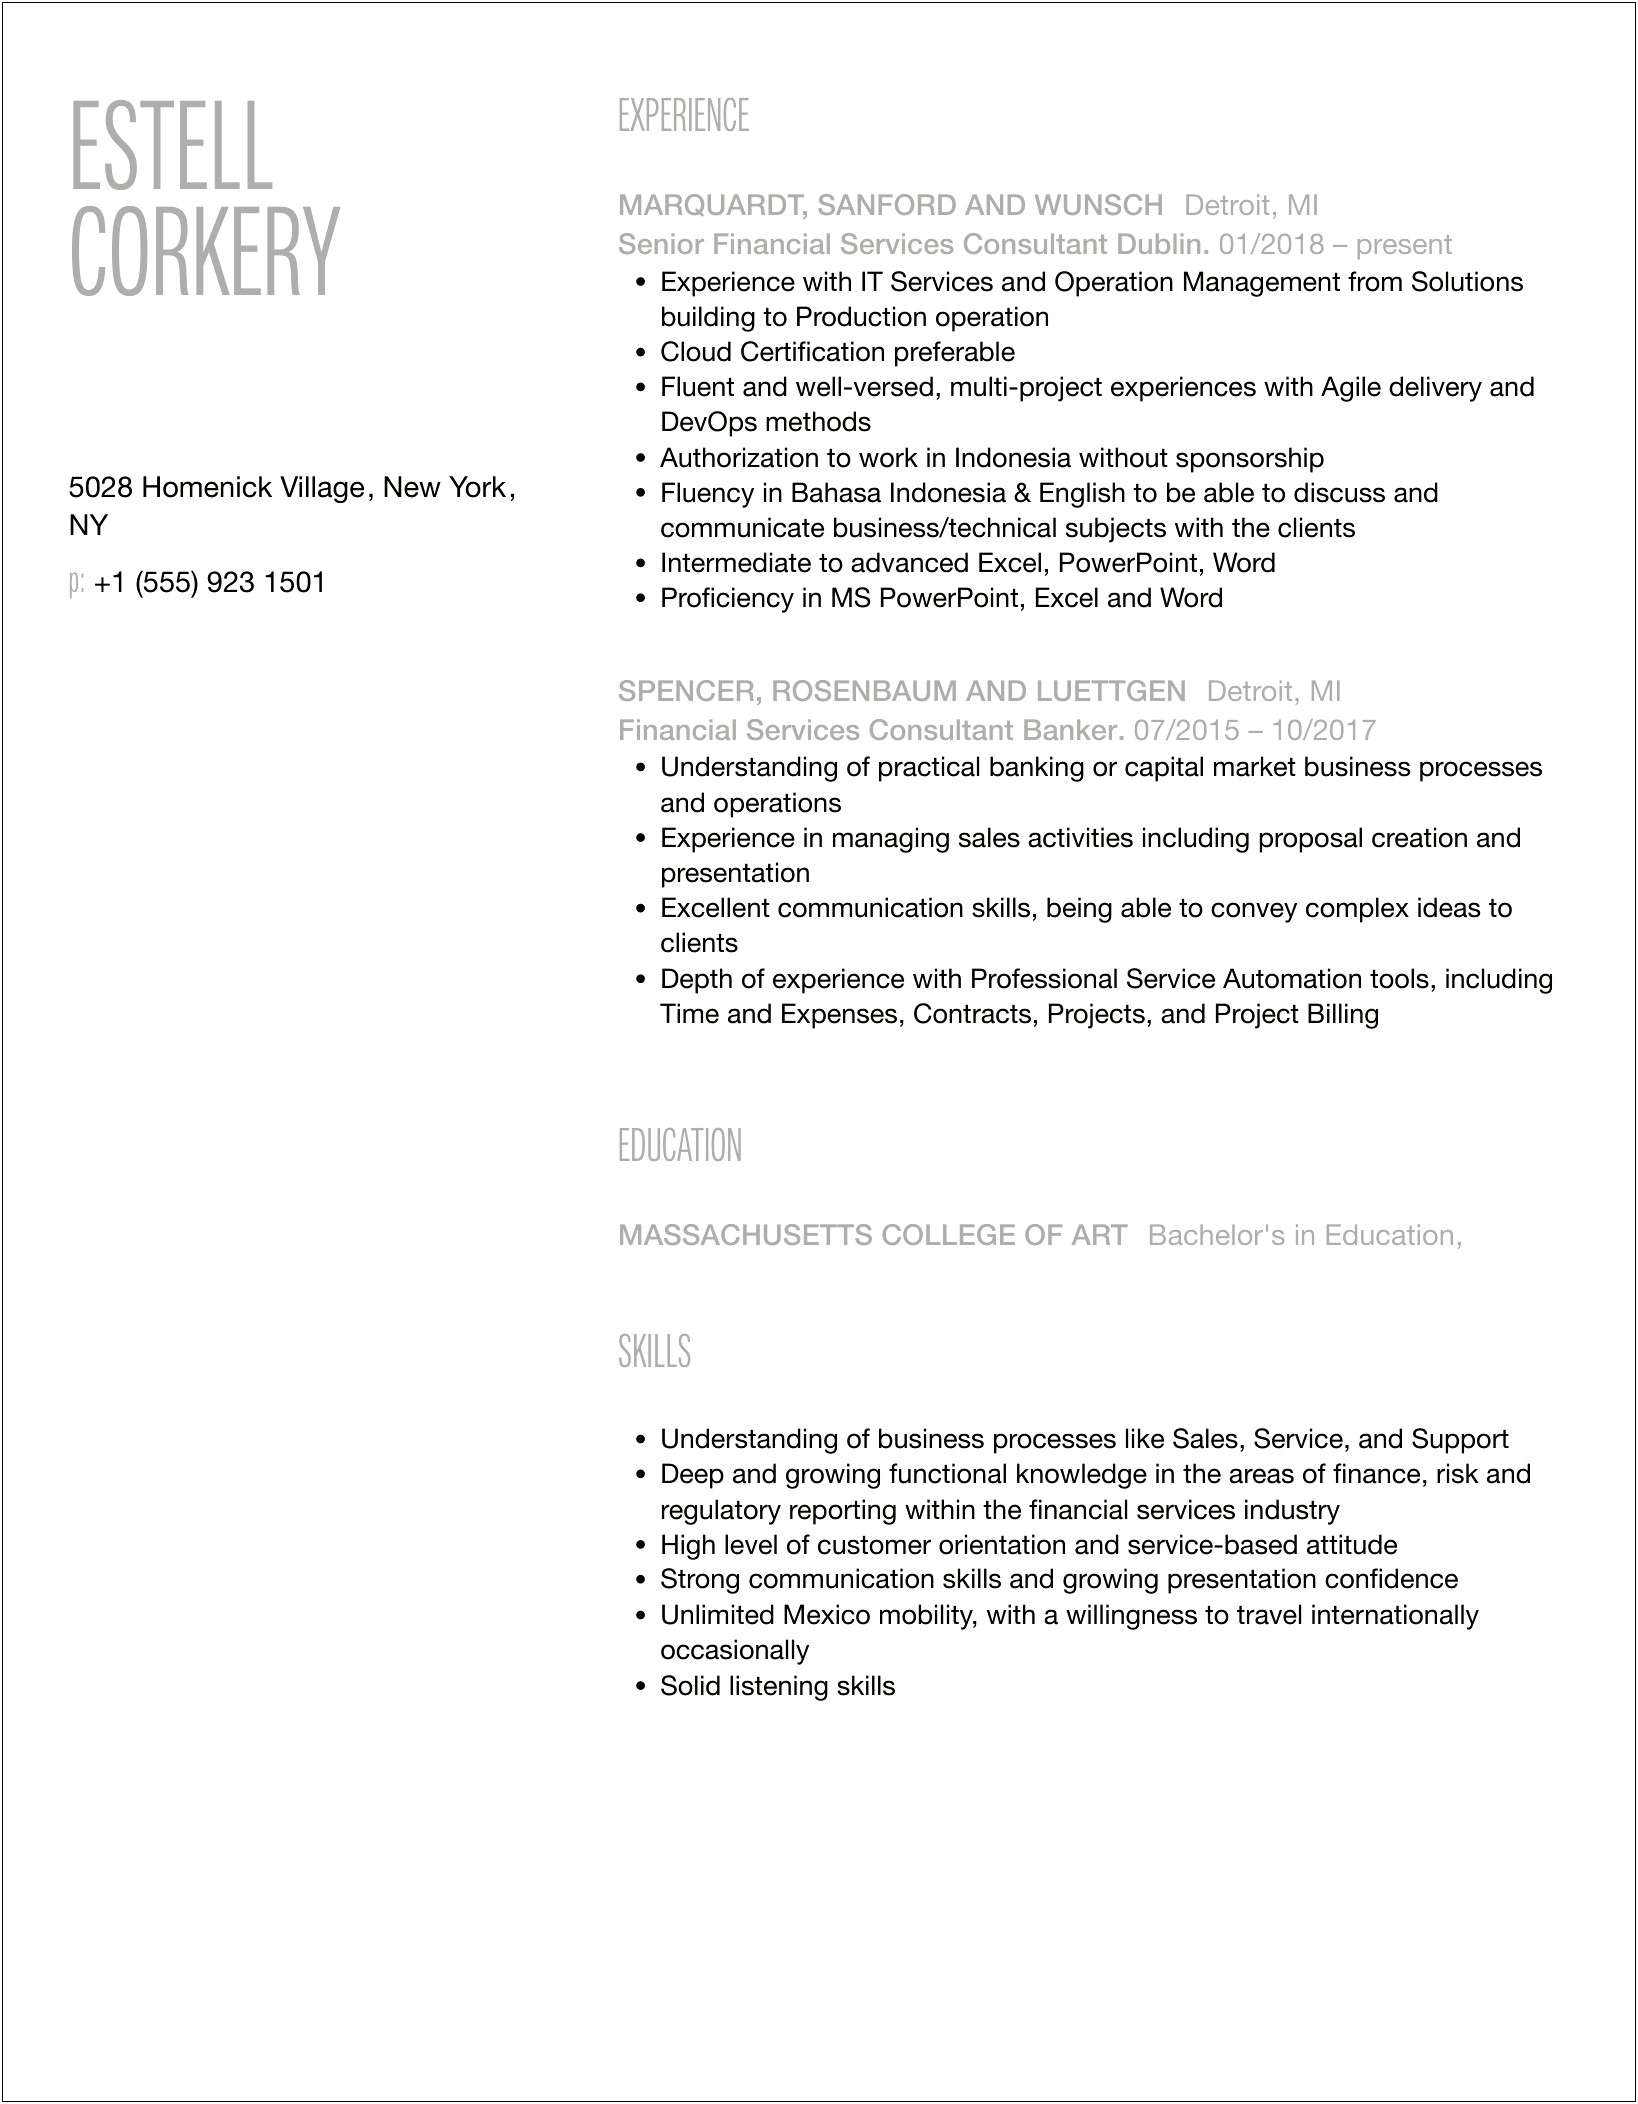 Resume Sample Proposal For Consulting Services